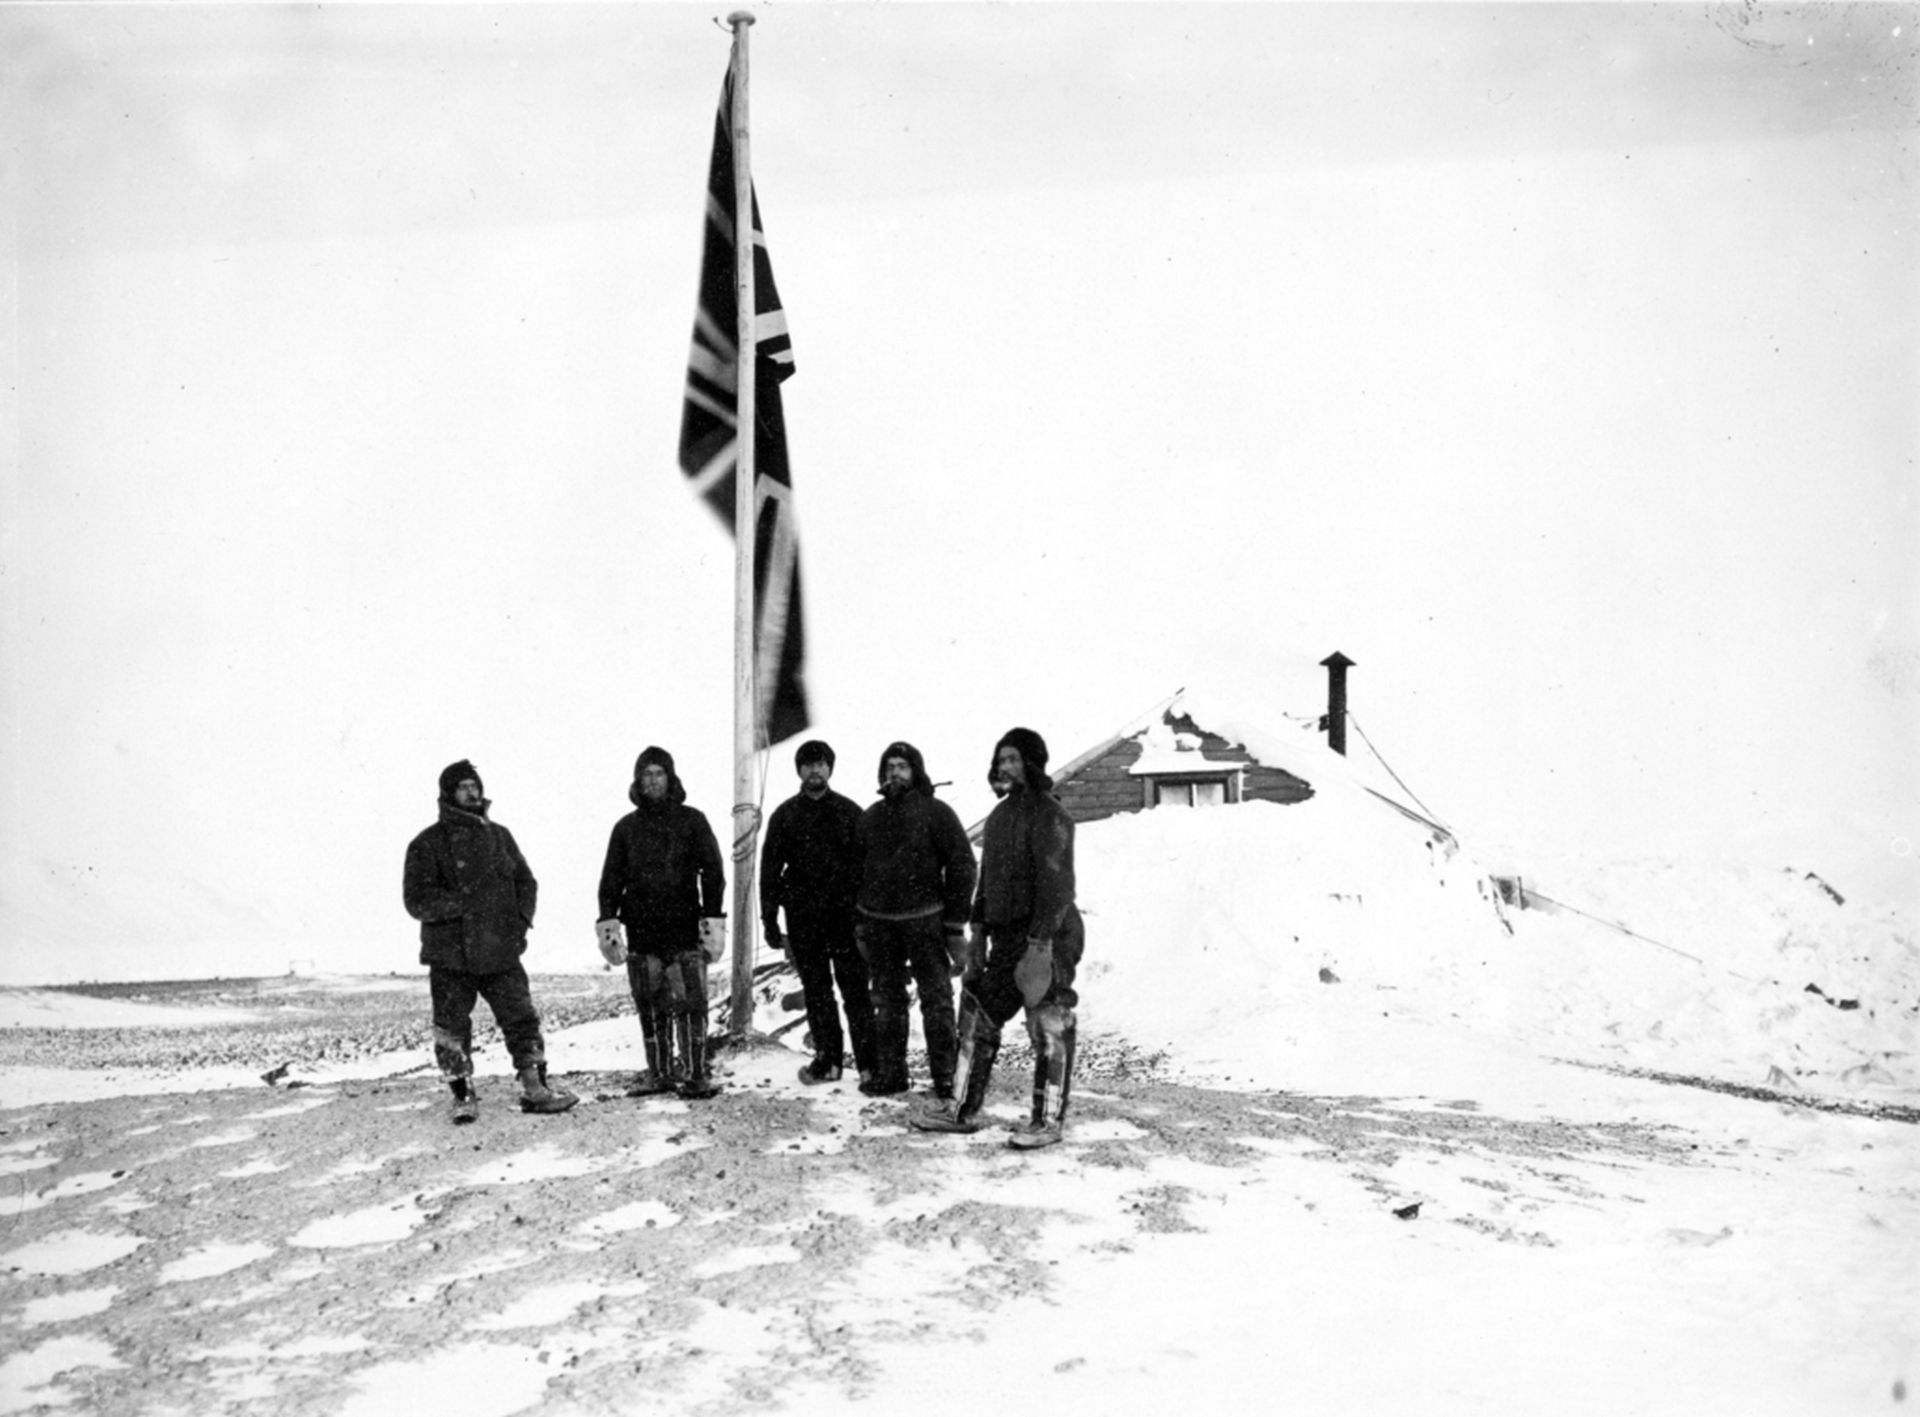 Members of Borchgrevink's expedition standing by the flag. From the left Klovstad, Colbeck, Evans, Fougner and Hanson.